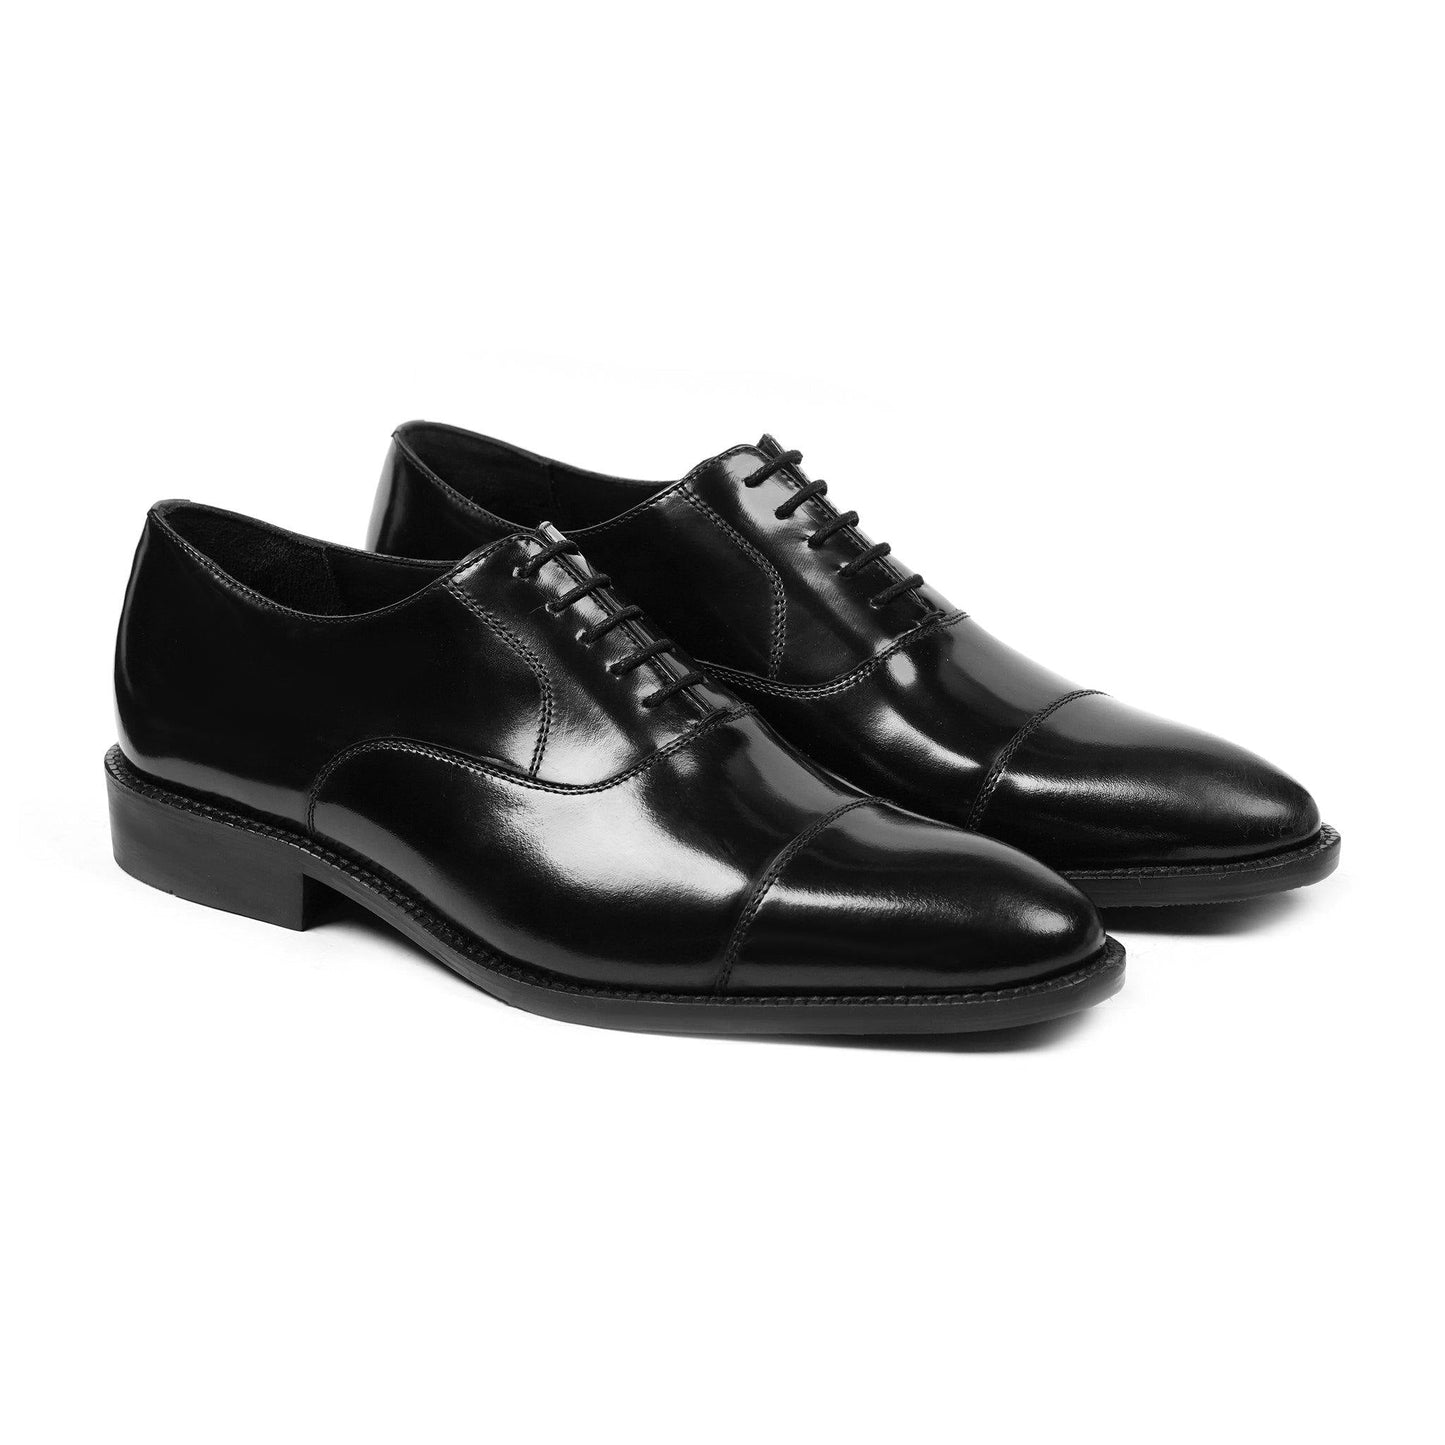 The Oxford Gentleman | Toe Cap Mens Leather Shoes Leather Boots, Leather Oxford Boots, Oxford Shoes, The Oxford Gentleman, Toe Cap Mens Leather Shoes